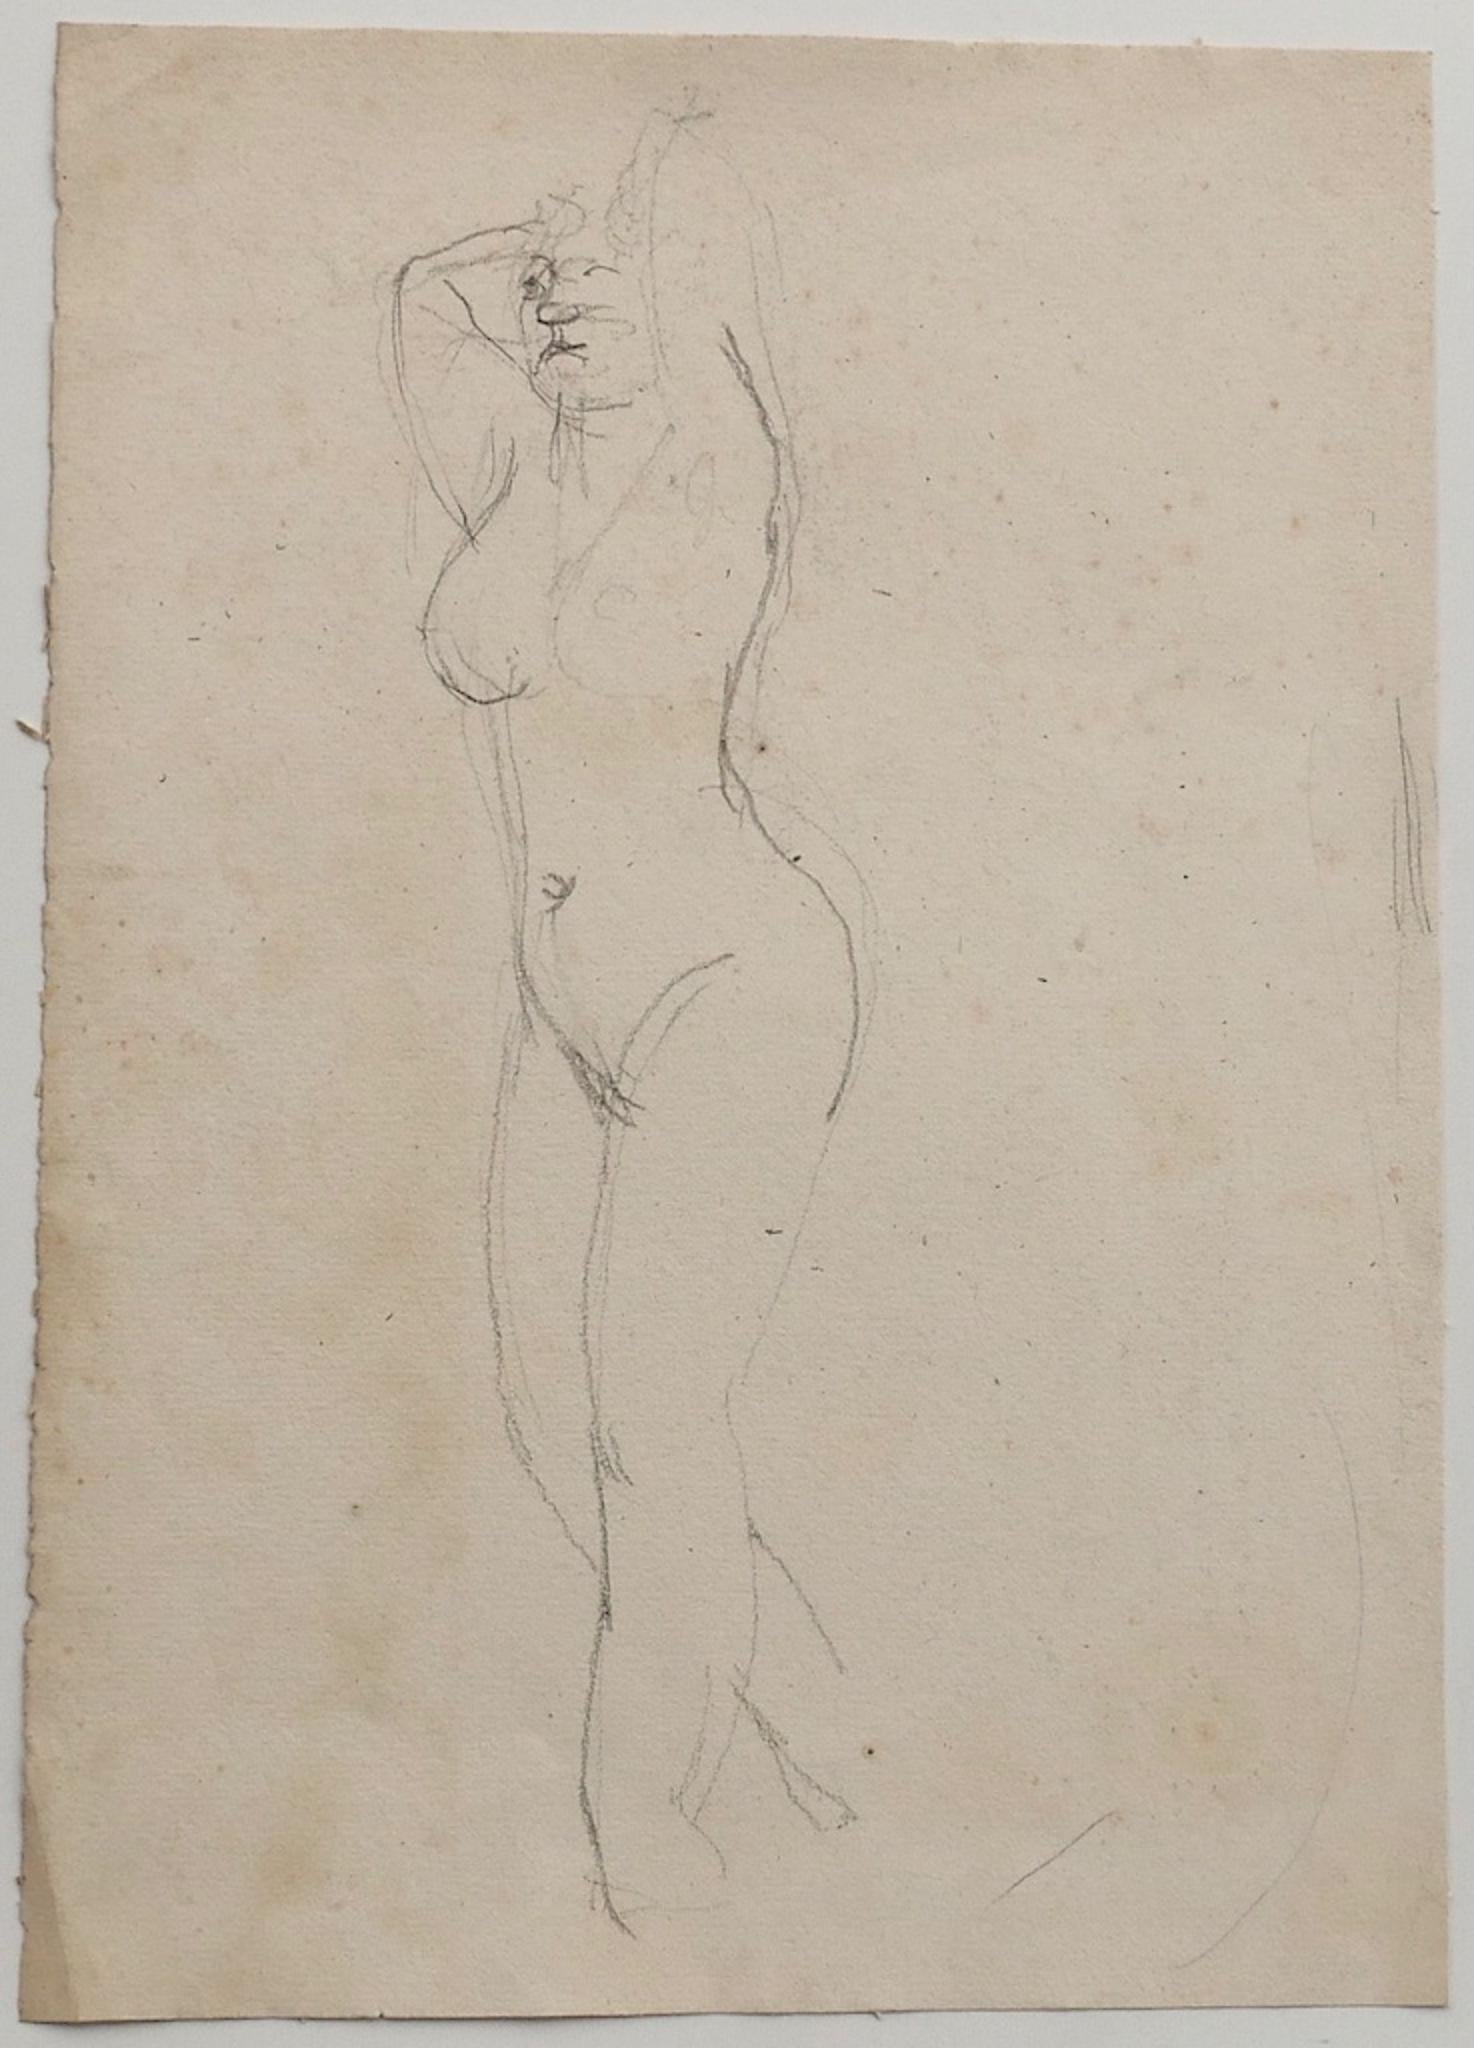 Nude is an original drawing in pencil on paper realized by Jeanne Daour.

The state of preservation good except for some foxings and stains.

Hand-signed on the lower right.

Sheet dimension: 27 x 37.5 cm.

The artwork represents both sides of the